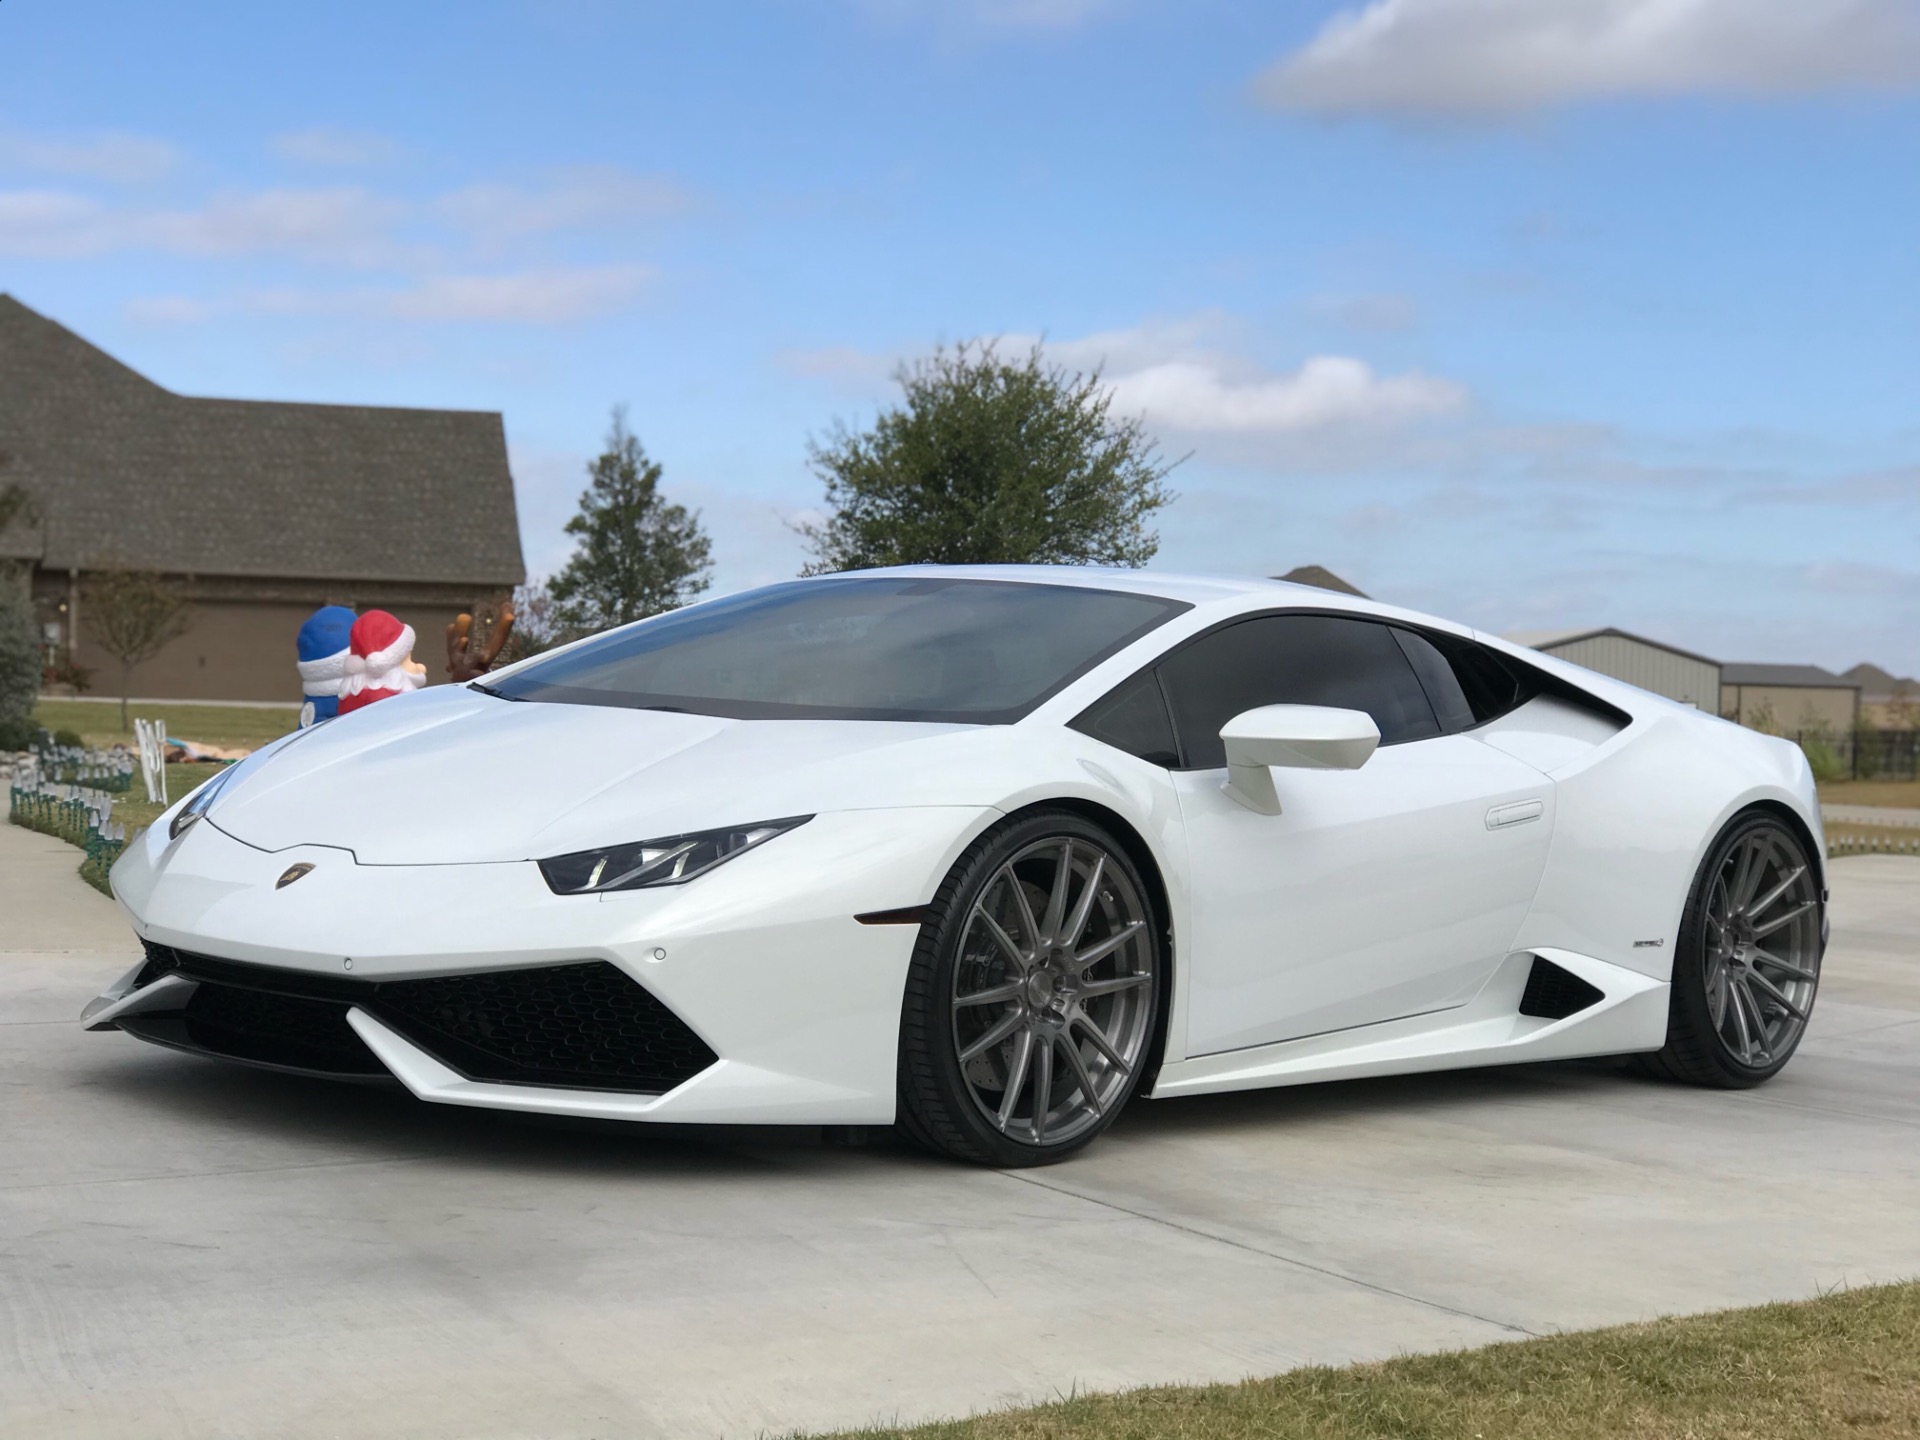 Used 2015 Lamborghini Huracan LP 610-4 Coupe ONLY 4K MILES! FRONT LIFT!  BICOLOR SPORTIVO! For Sale (Special Pricing) | Chicago Motor Cars Stock  #17755